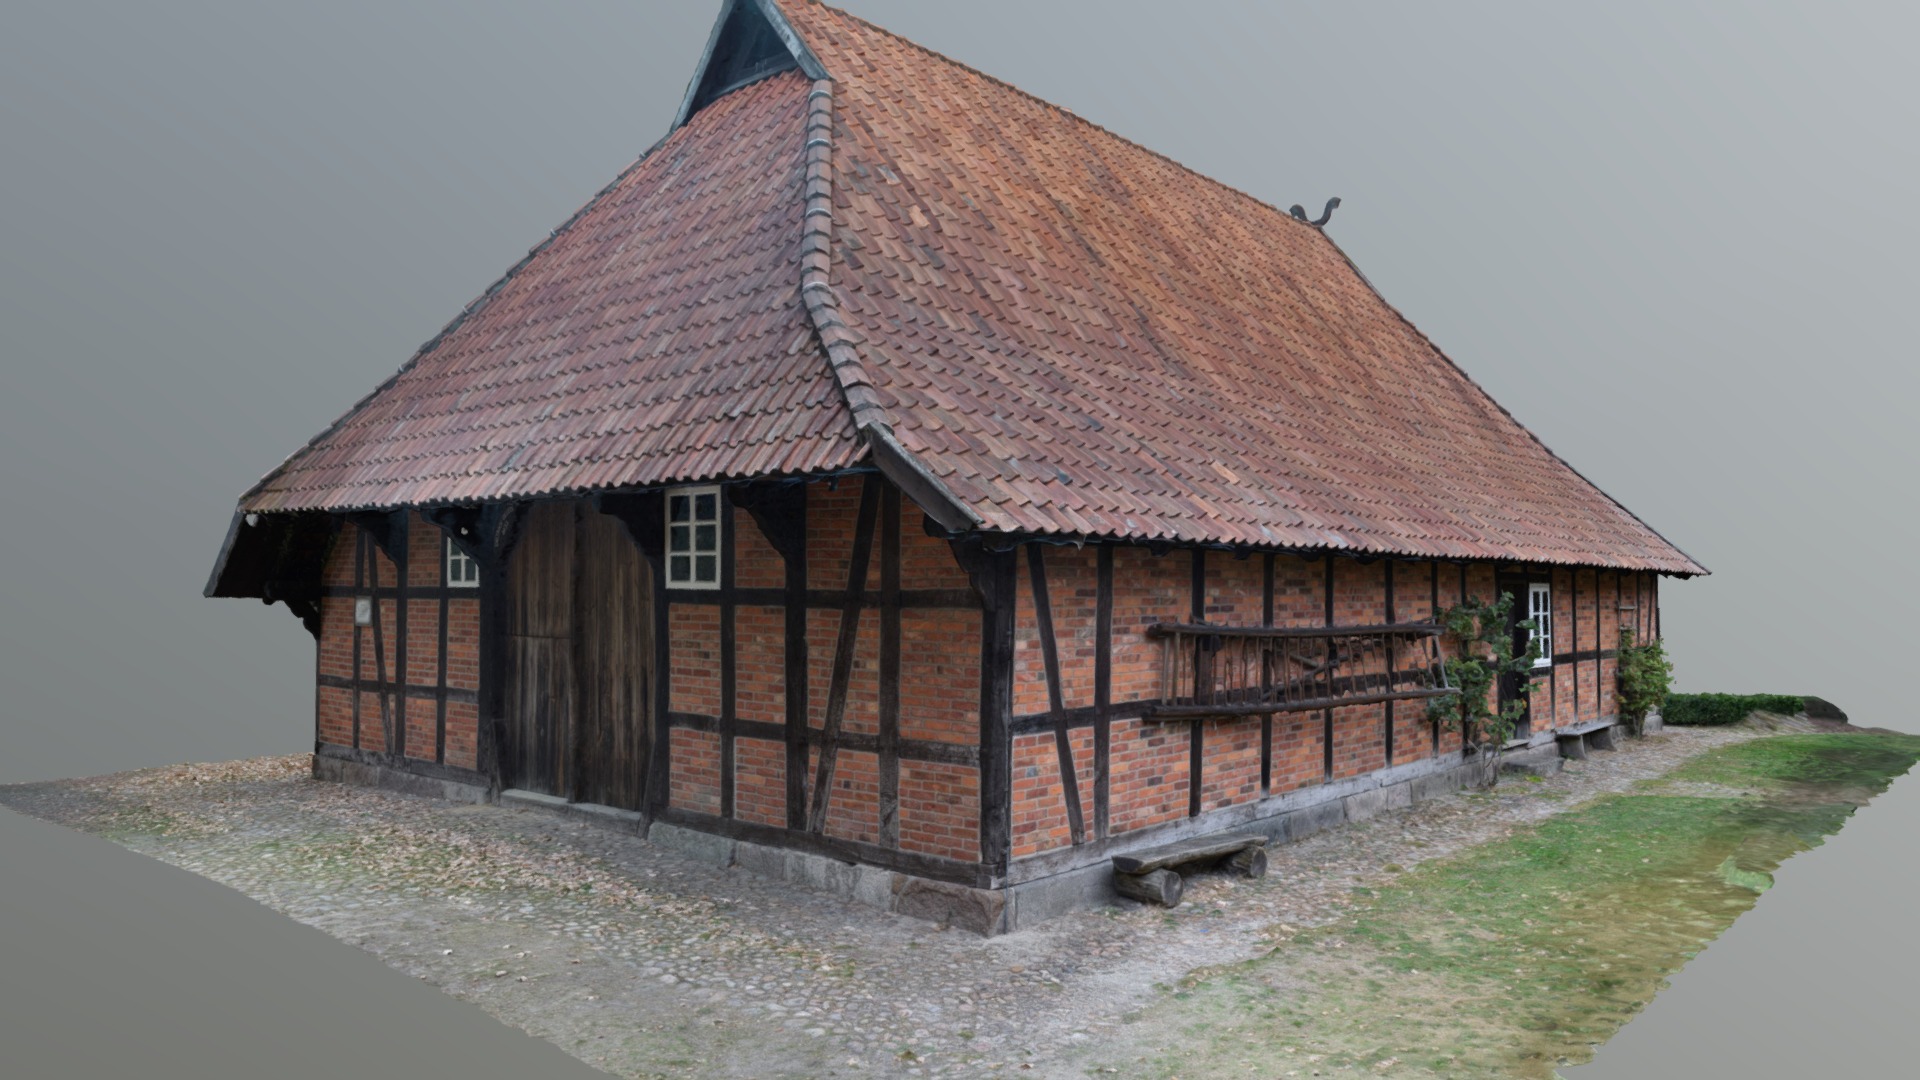 3D model Wohnhaus - This is a 3D model of the Wohnhaus. The 3D model is about a wooden house with a grass yard.